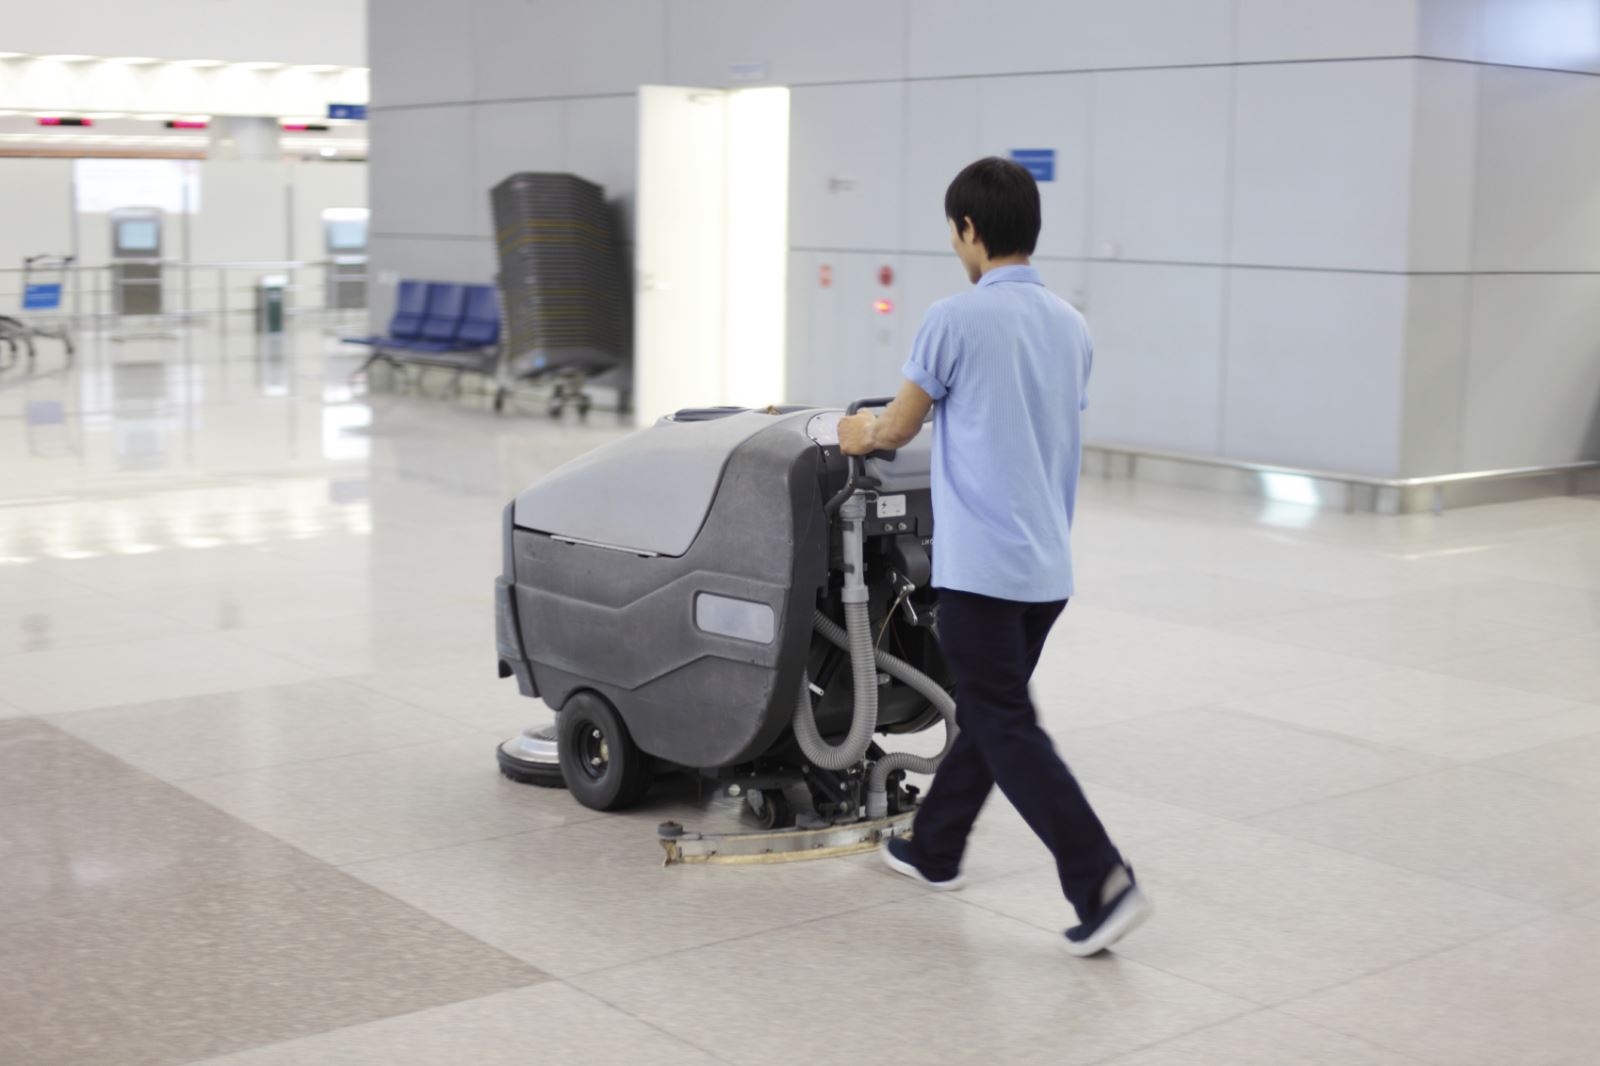 Cleaning & Maintaining Hard Floor Surfaces